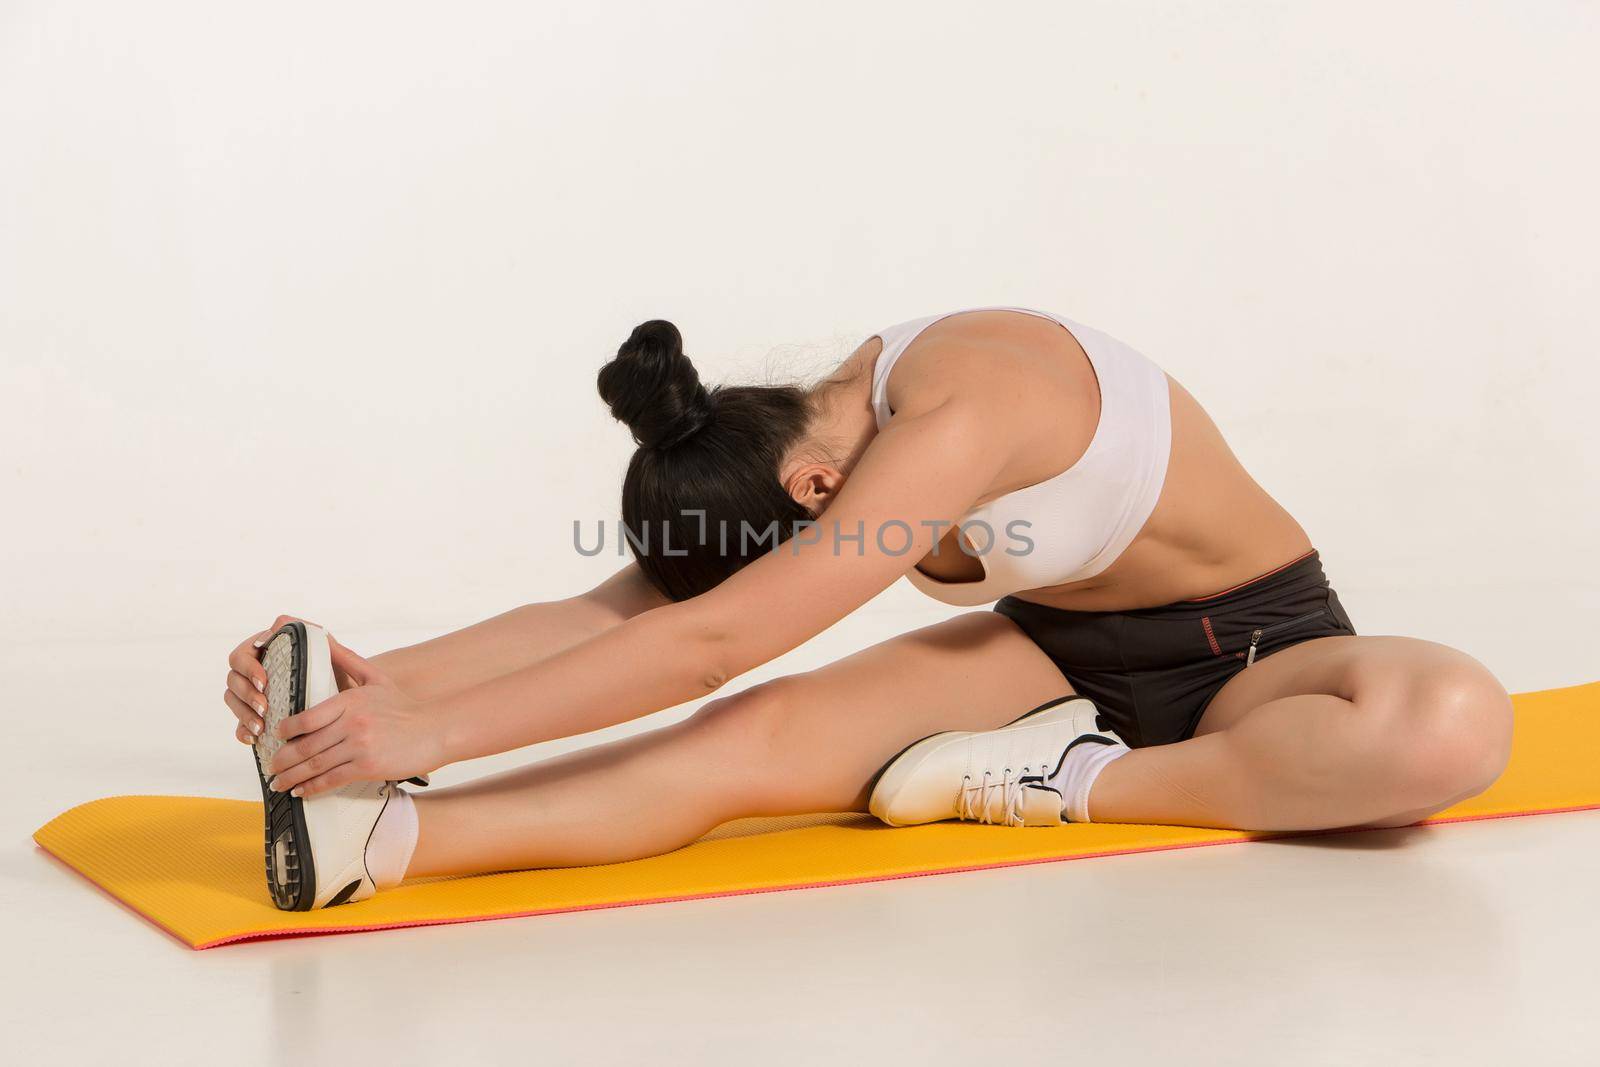 Portrait of young attractive woman doing exercises. Brunette with fit body on yoga mat. Healthy lifestyle and sports concept. Series of exercise poses.